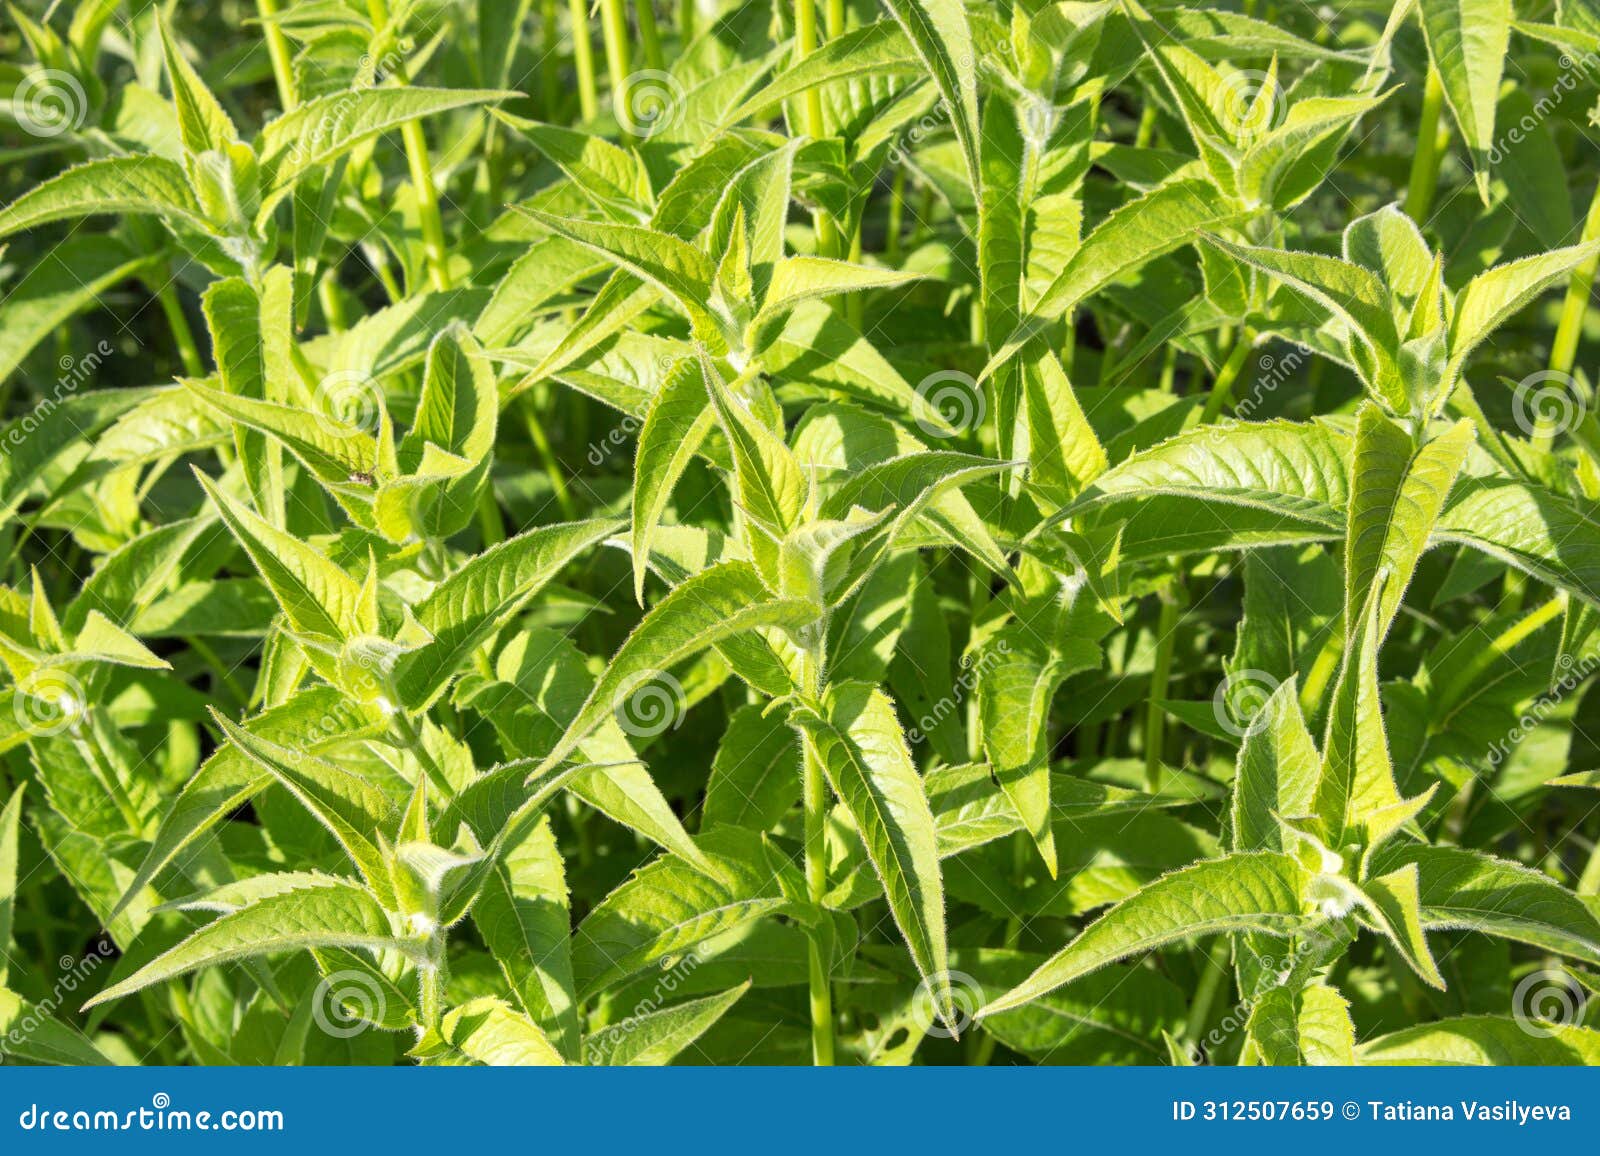 green grass and leaves of monarda fistulosa plant. summer floral background.